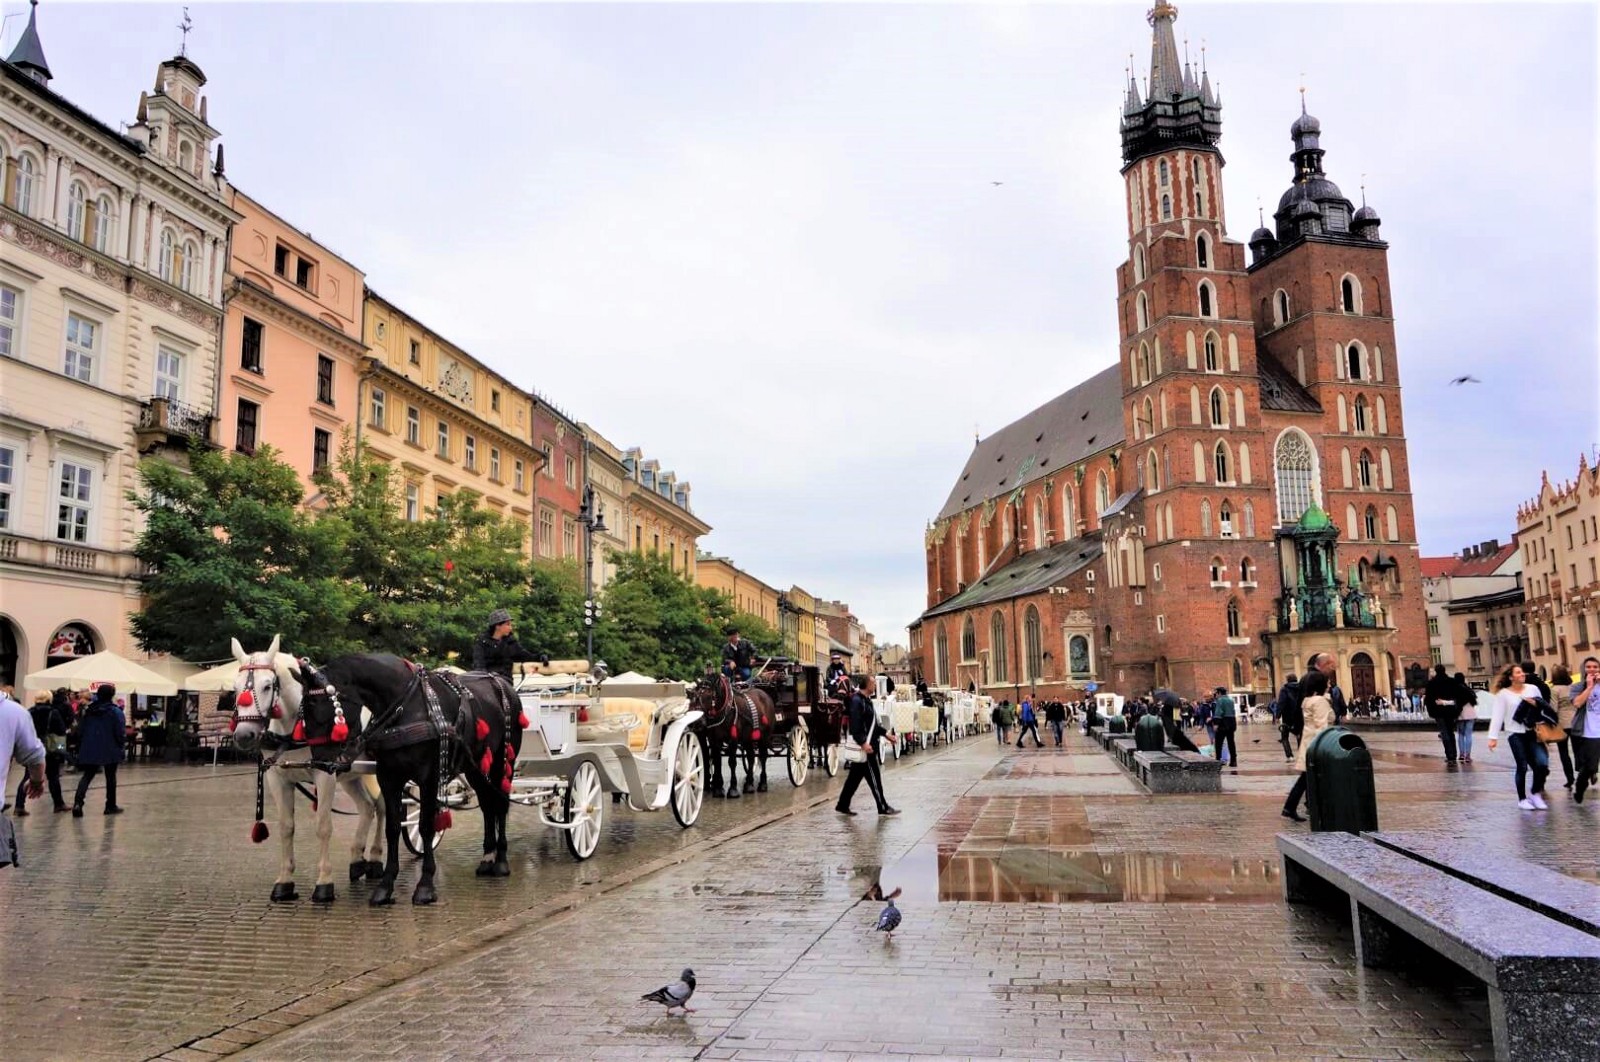 The square at Krakow old town center